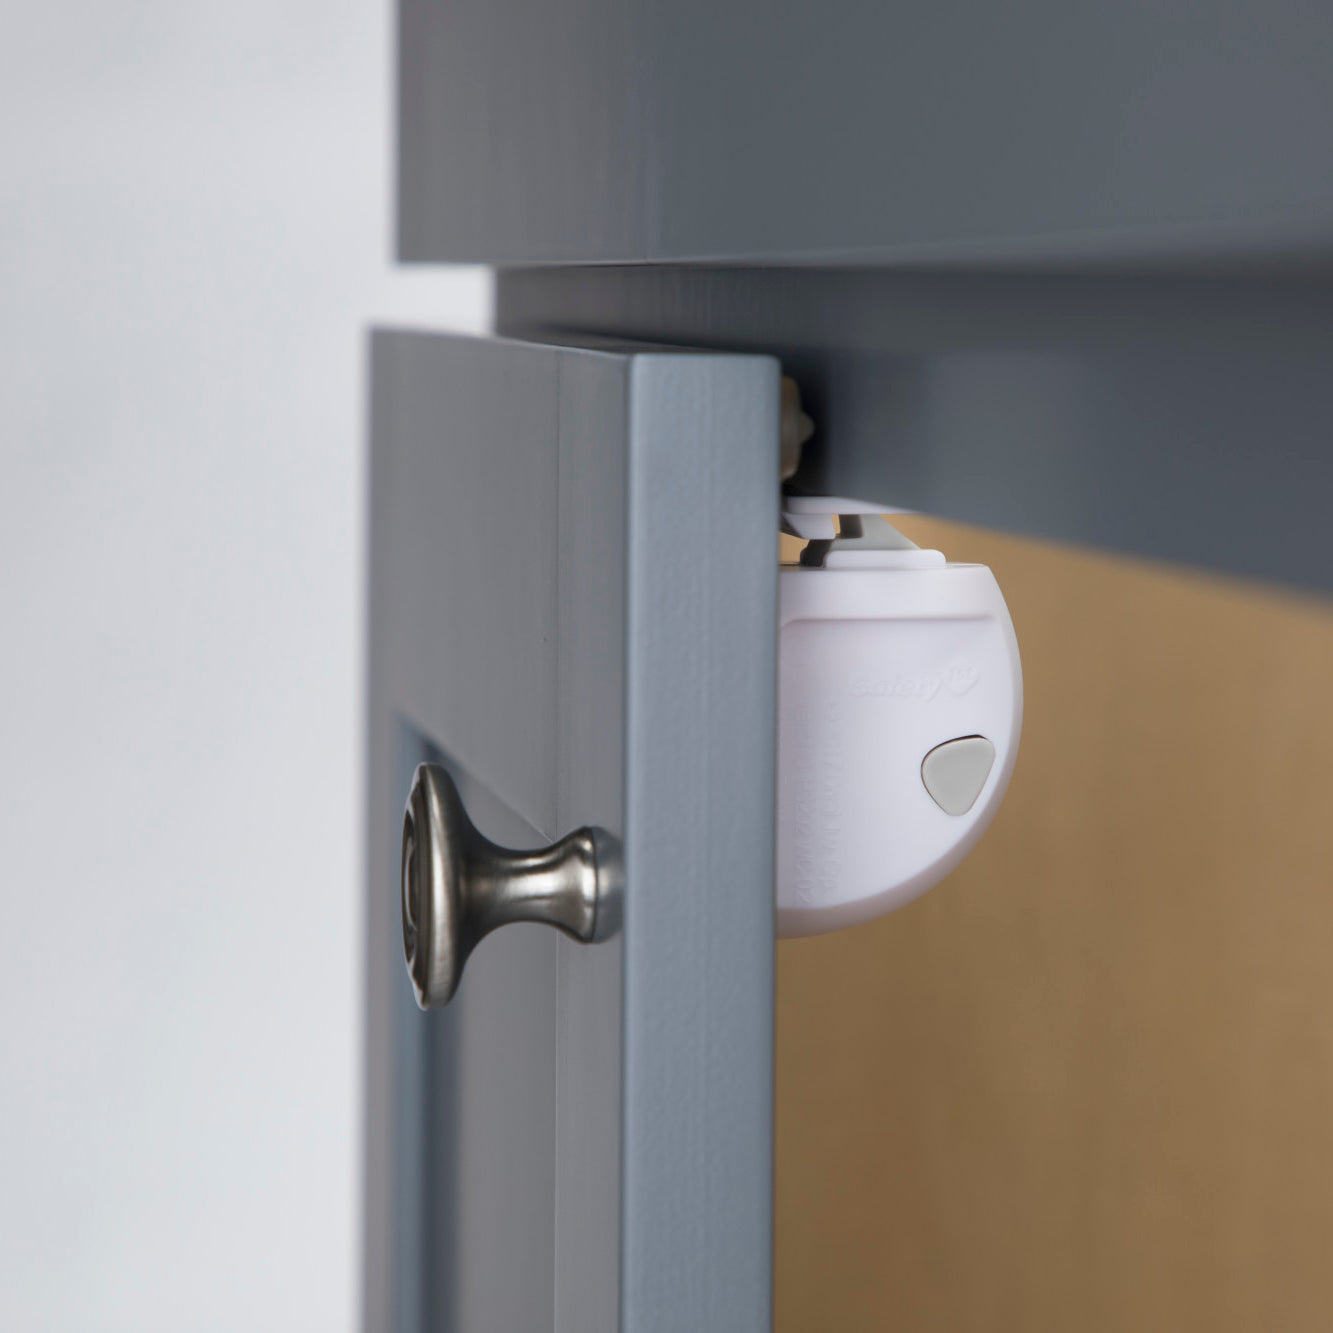 Lock shown properly installed on a cabinet door